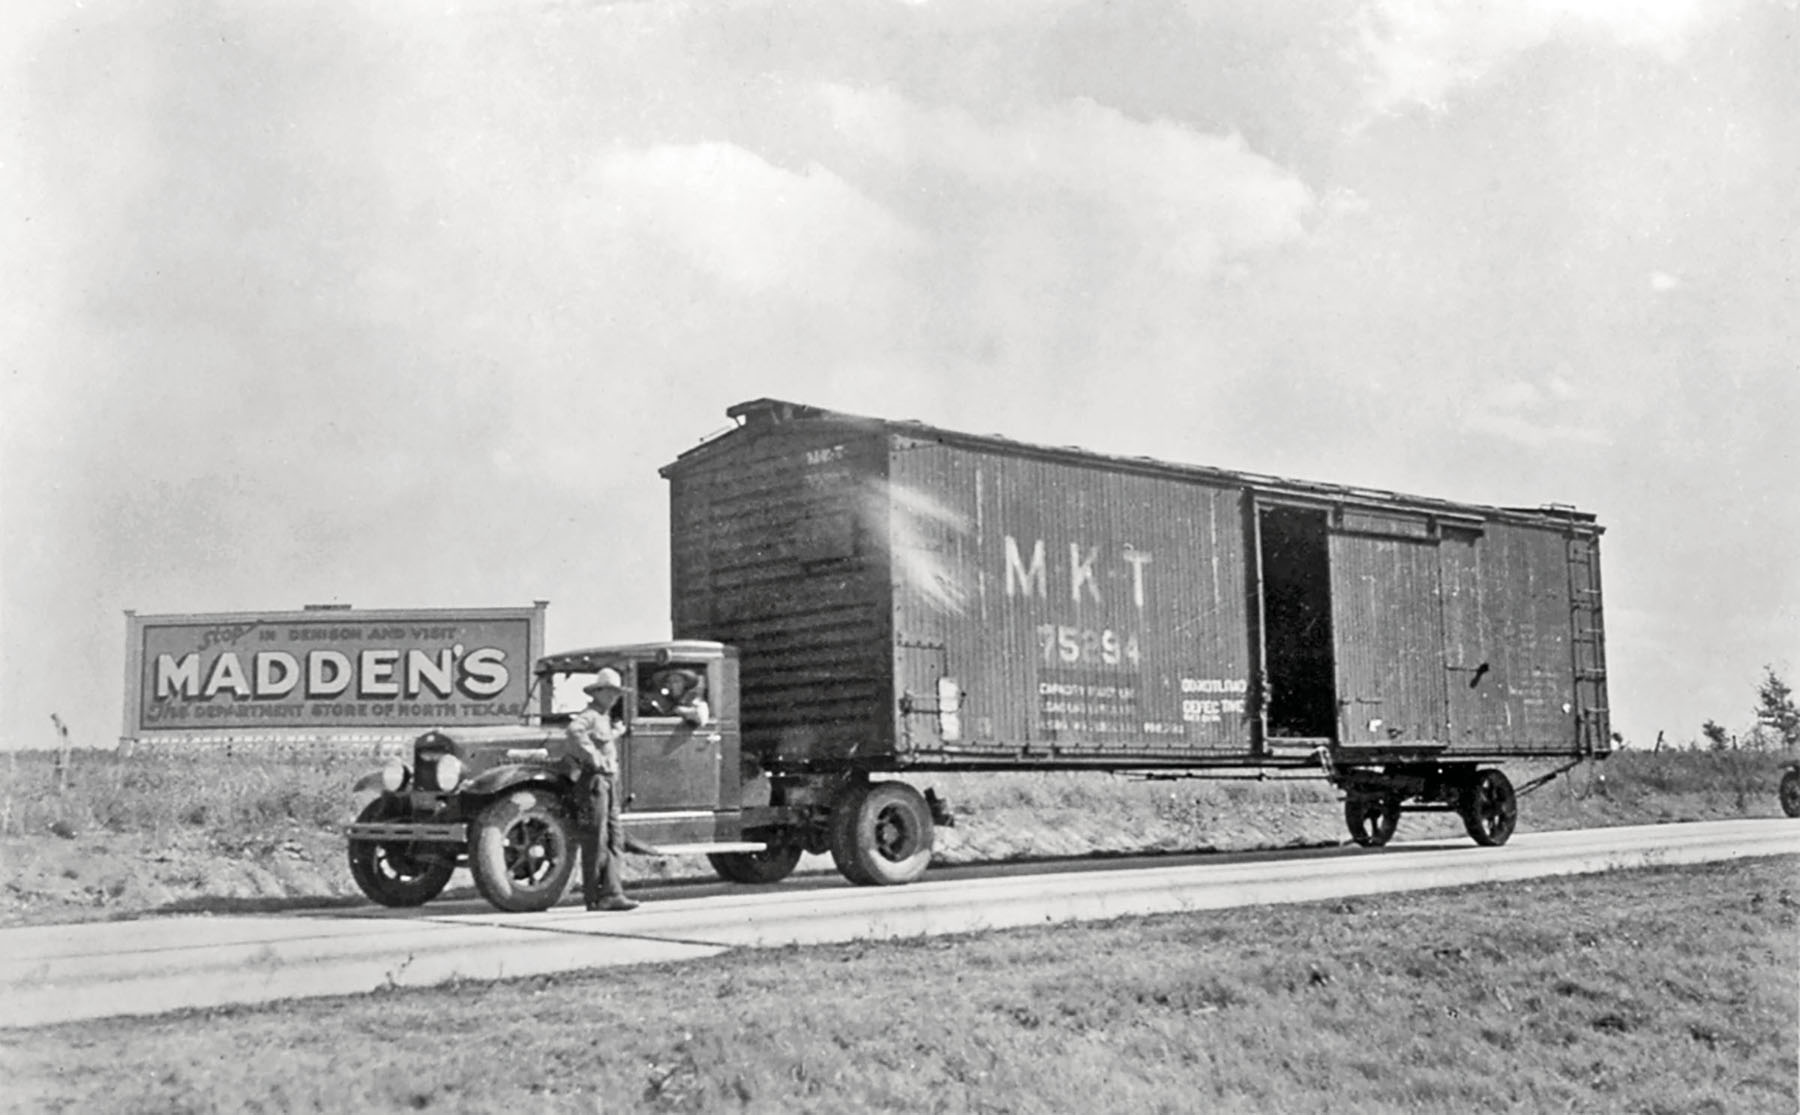 An old photograph of an early semi truck